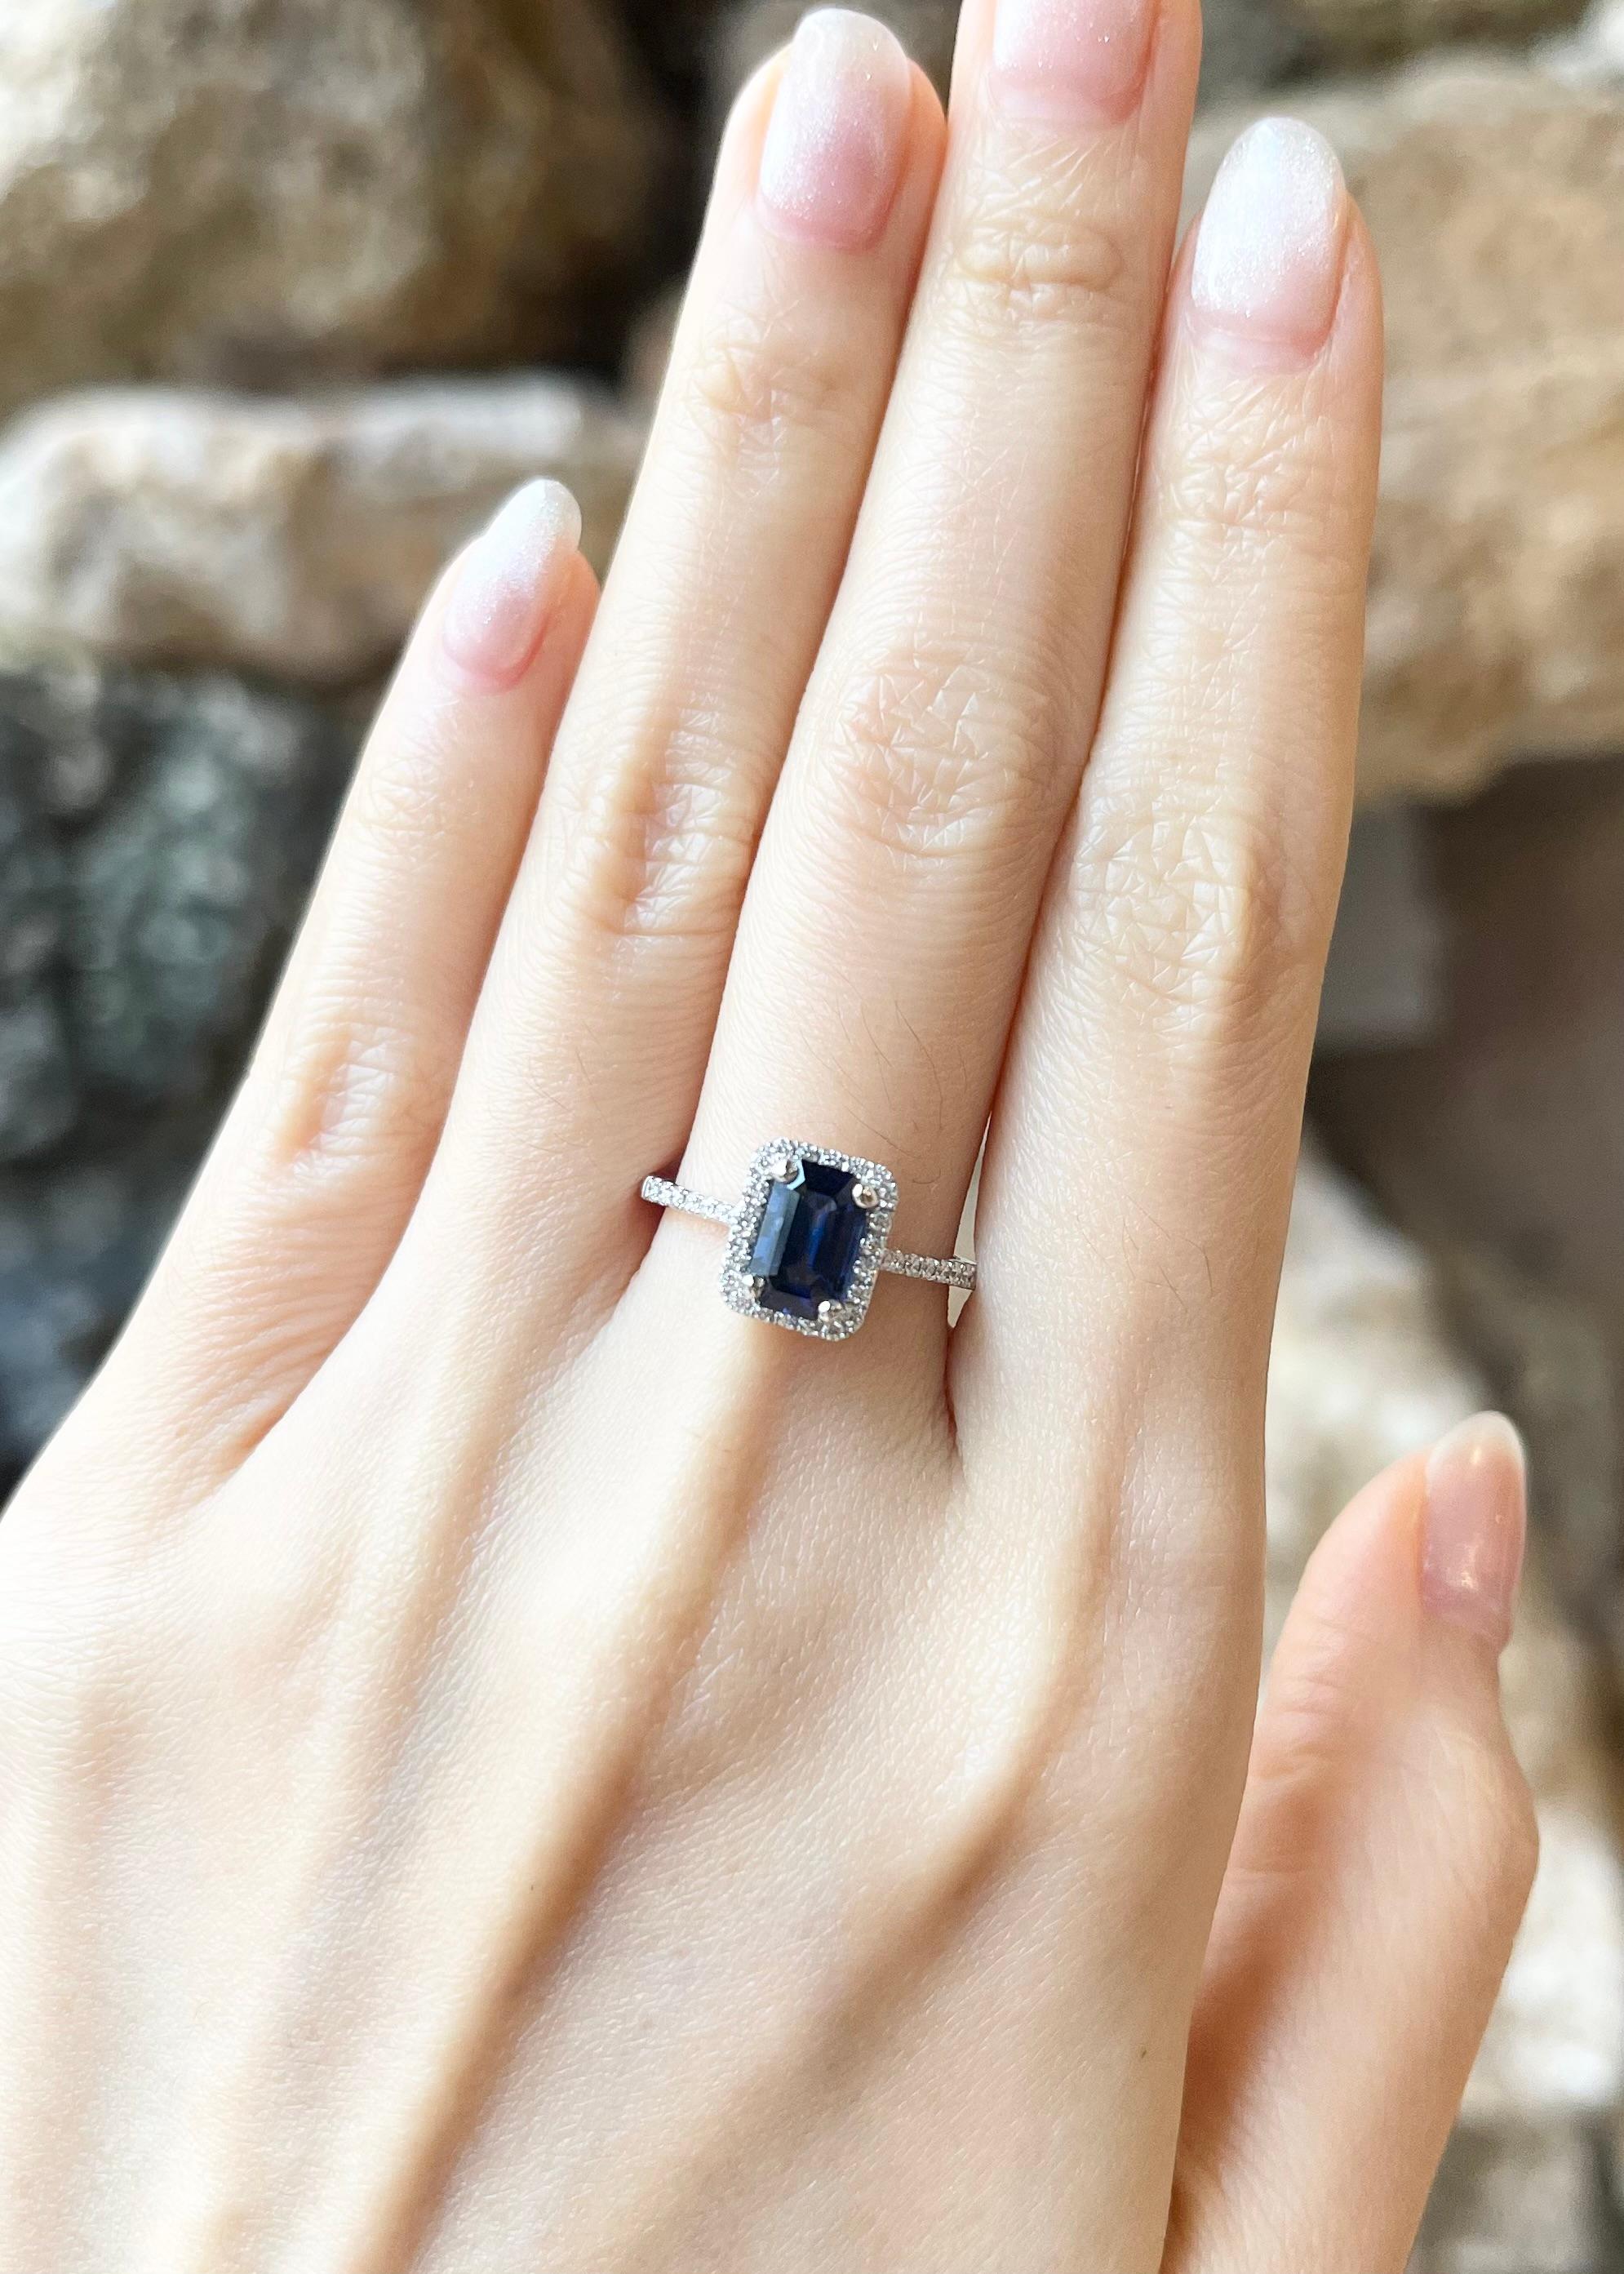 Blue Sapphire 1.49 carats with Diamond 0.21 carat Ring set in 18K White Gold Settings

Width:  0.7 cm 
Length: 1.0 cm
Ring Size: 54
Total Weight: 3.37 grams

